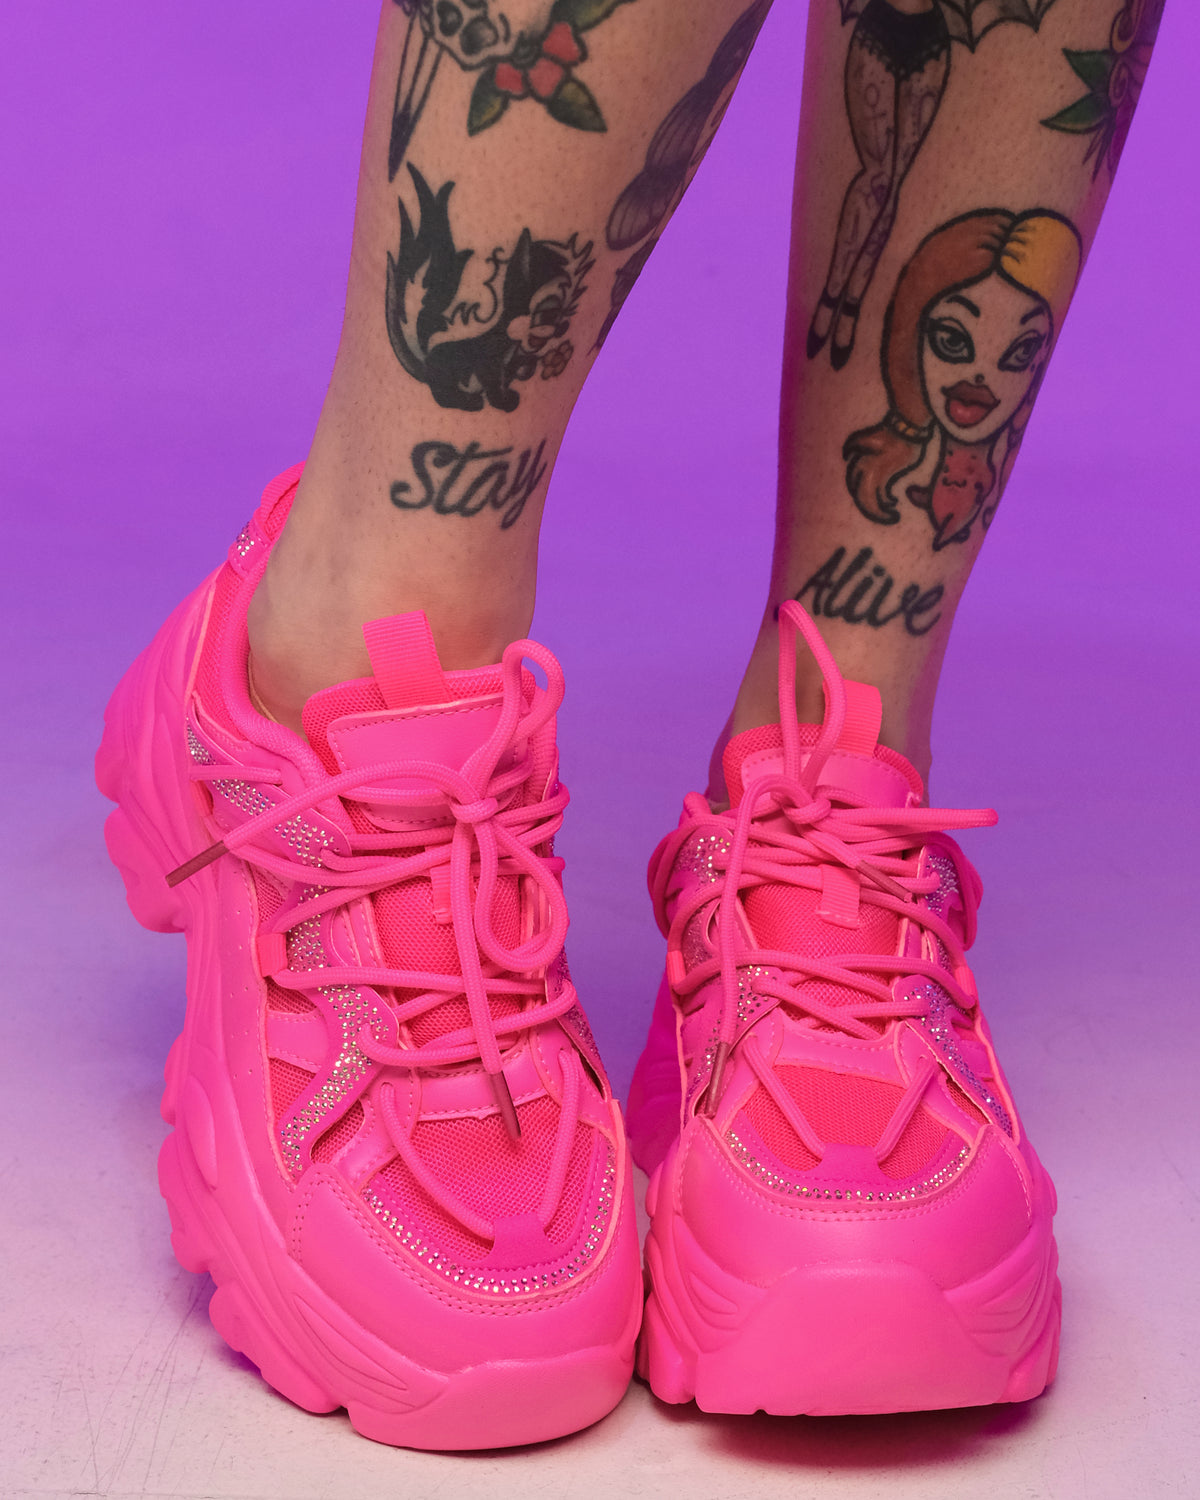 Hot Pink Steppin' Out Sneakers, 6 | Rave Wonderland | Outfits Rave | Festival Outfits | Rave Clothes